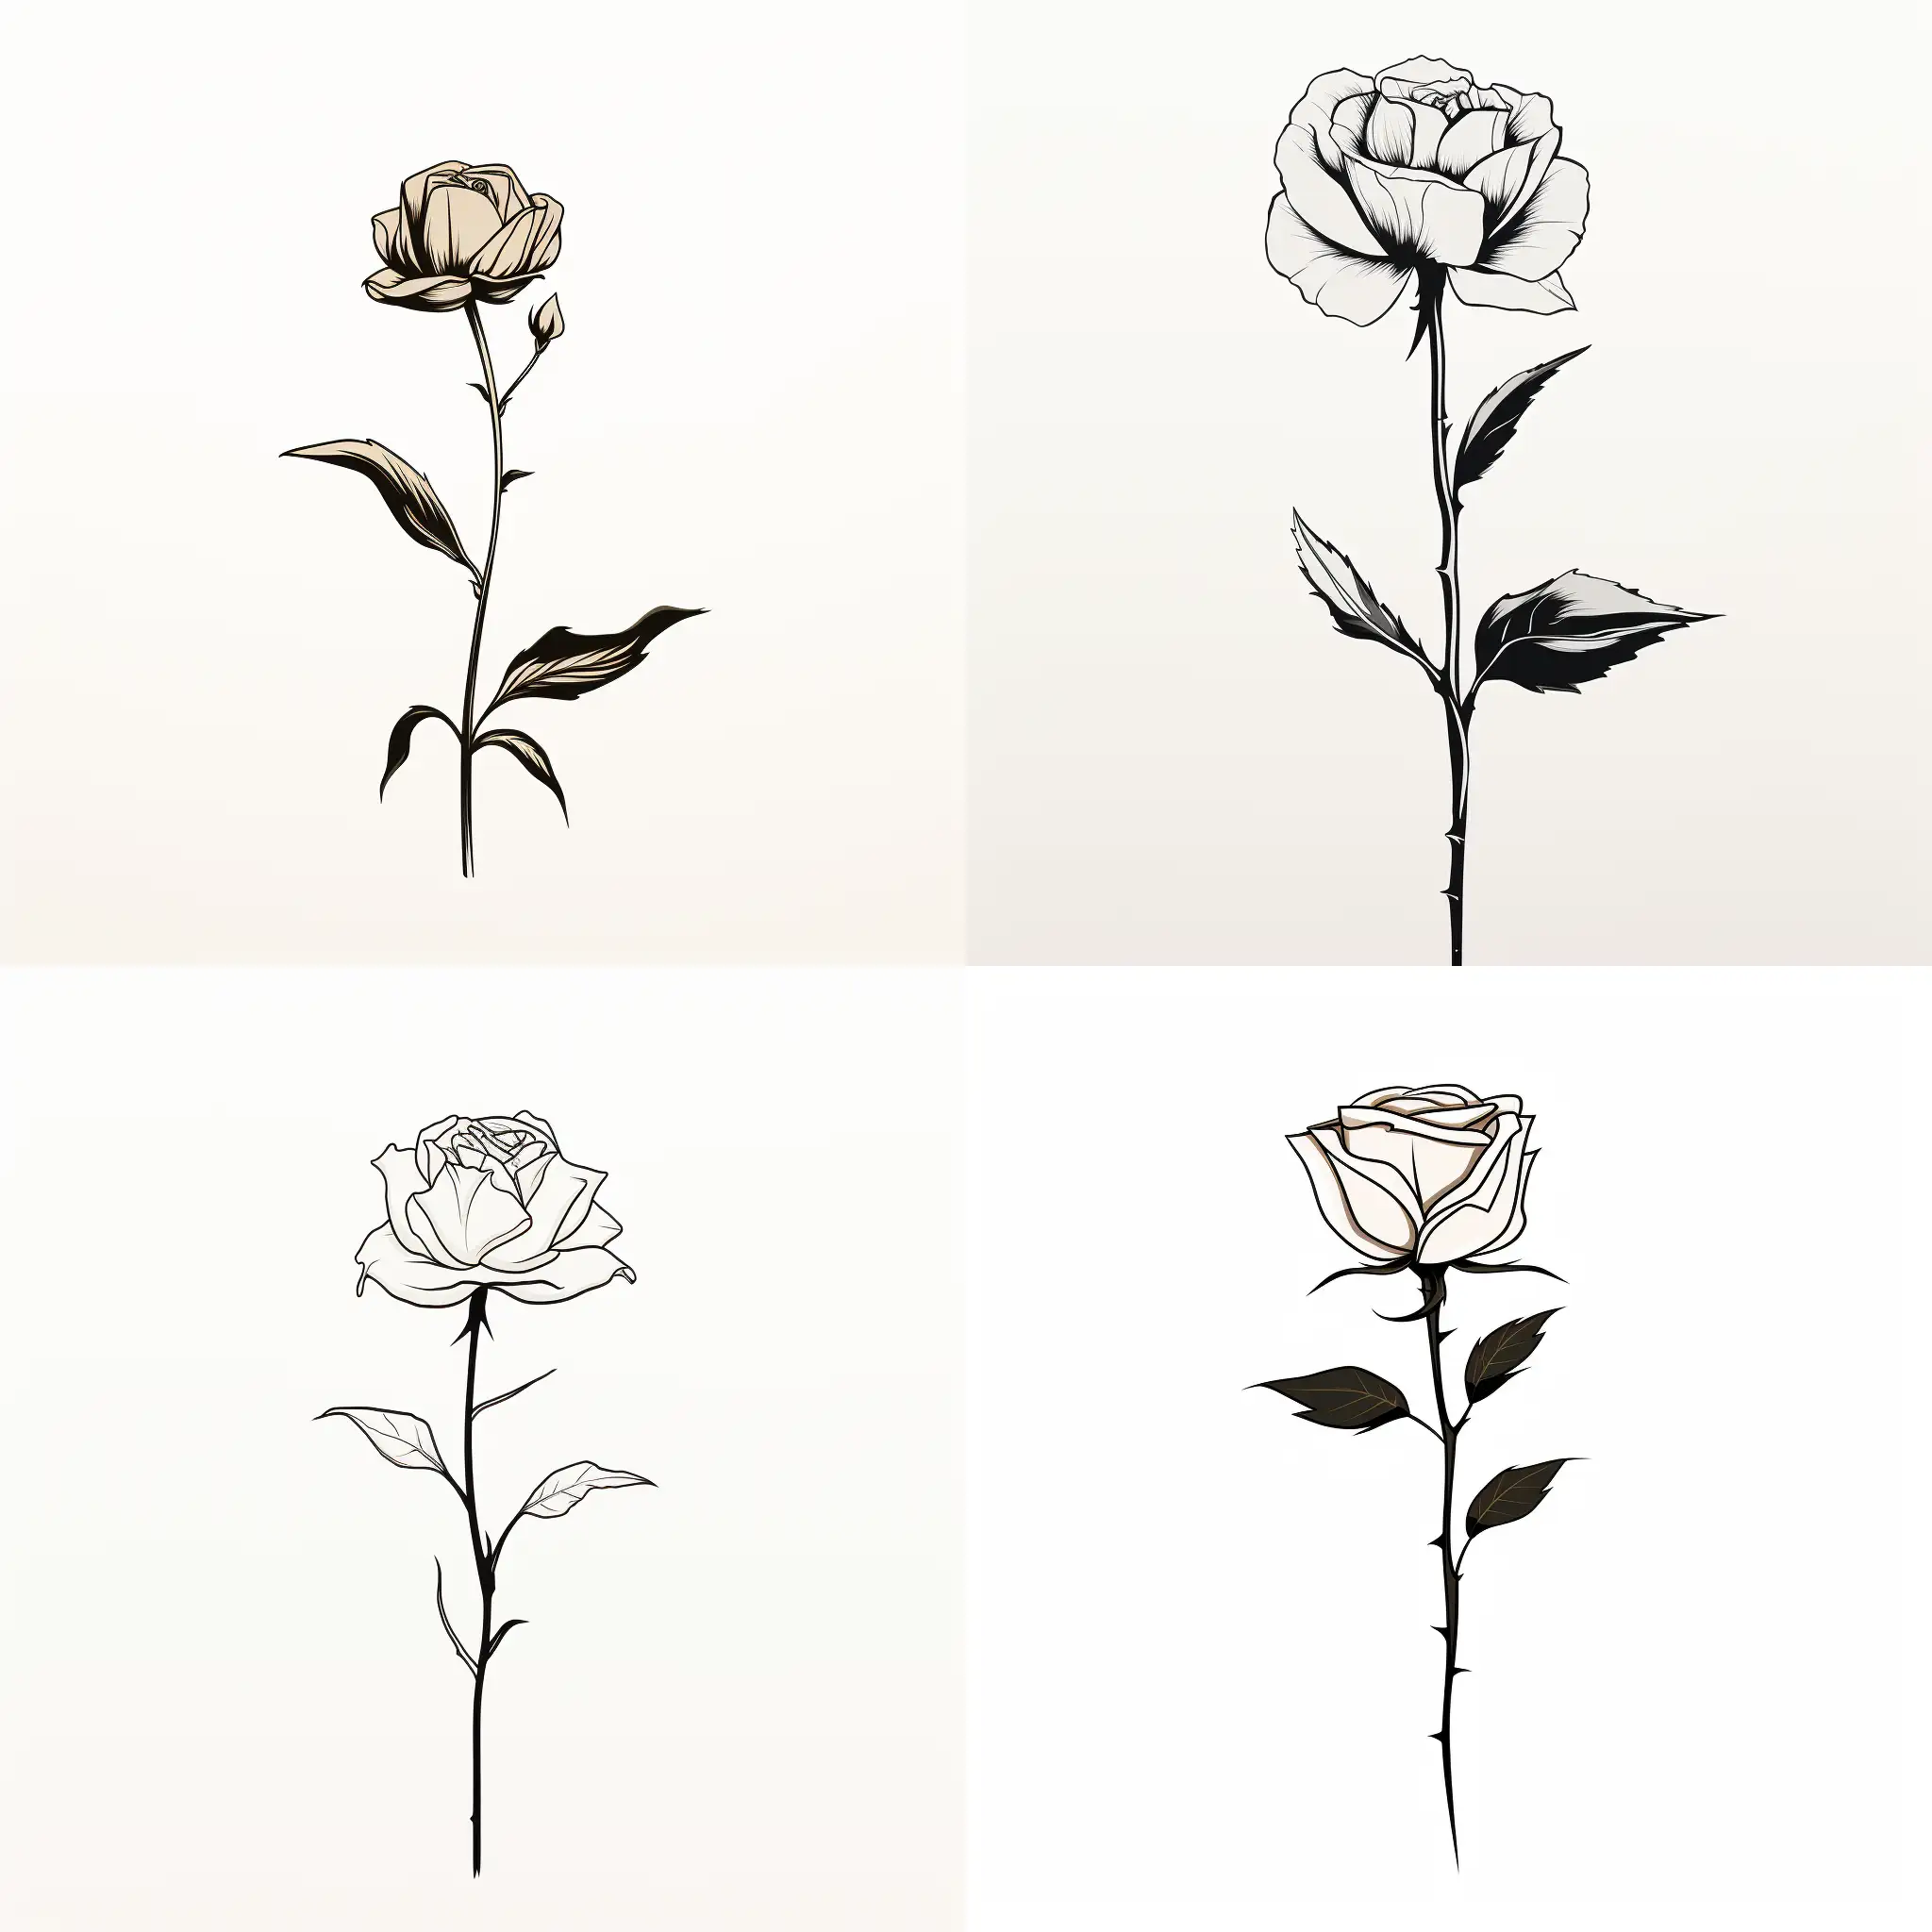 minimalist black line art of a rose on a clean white background